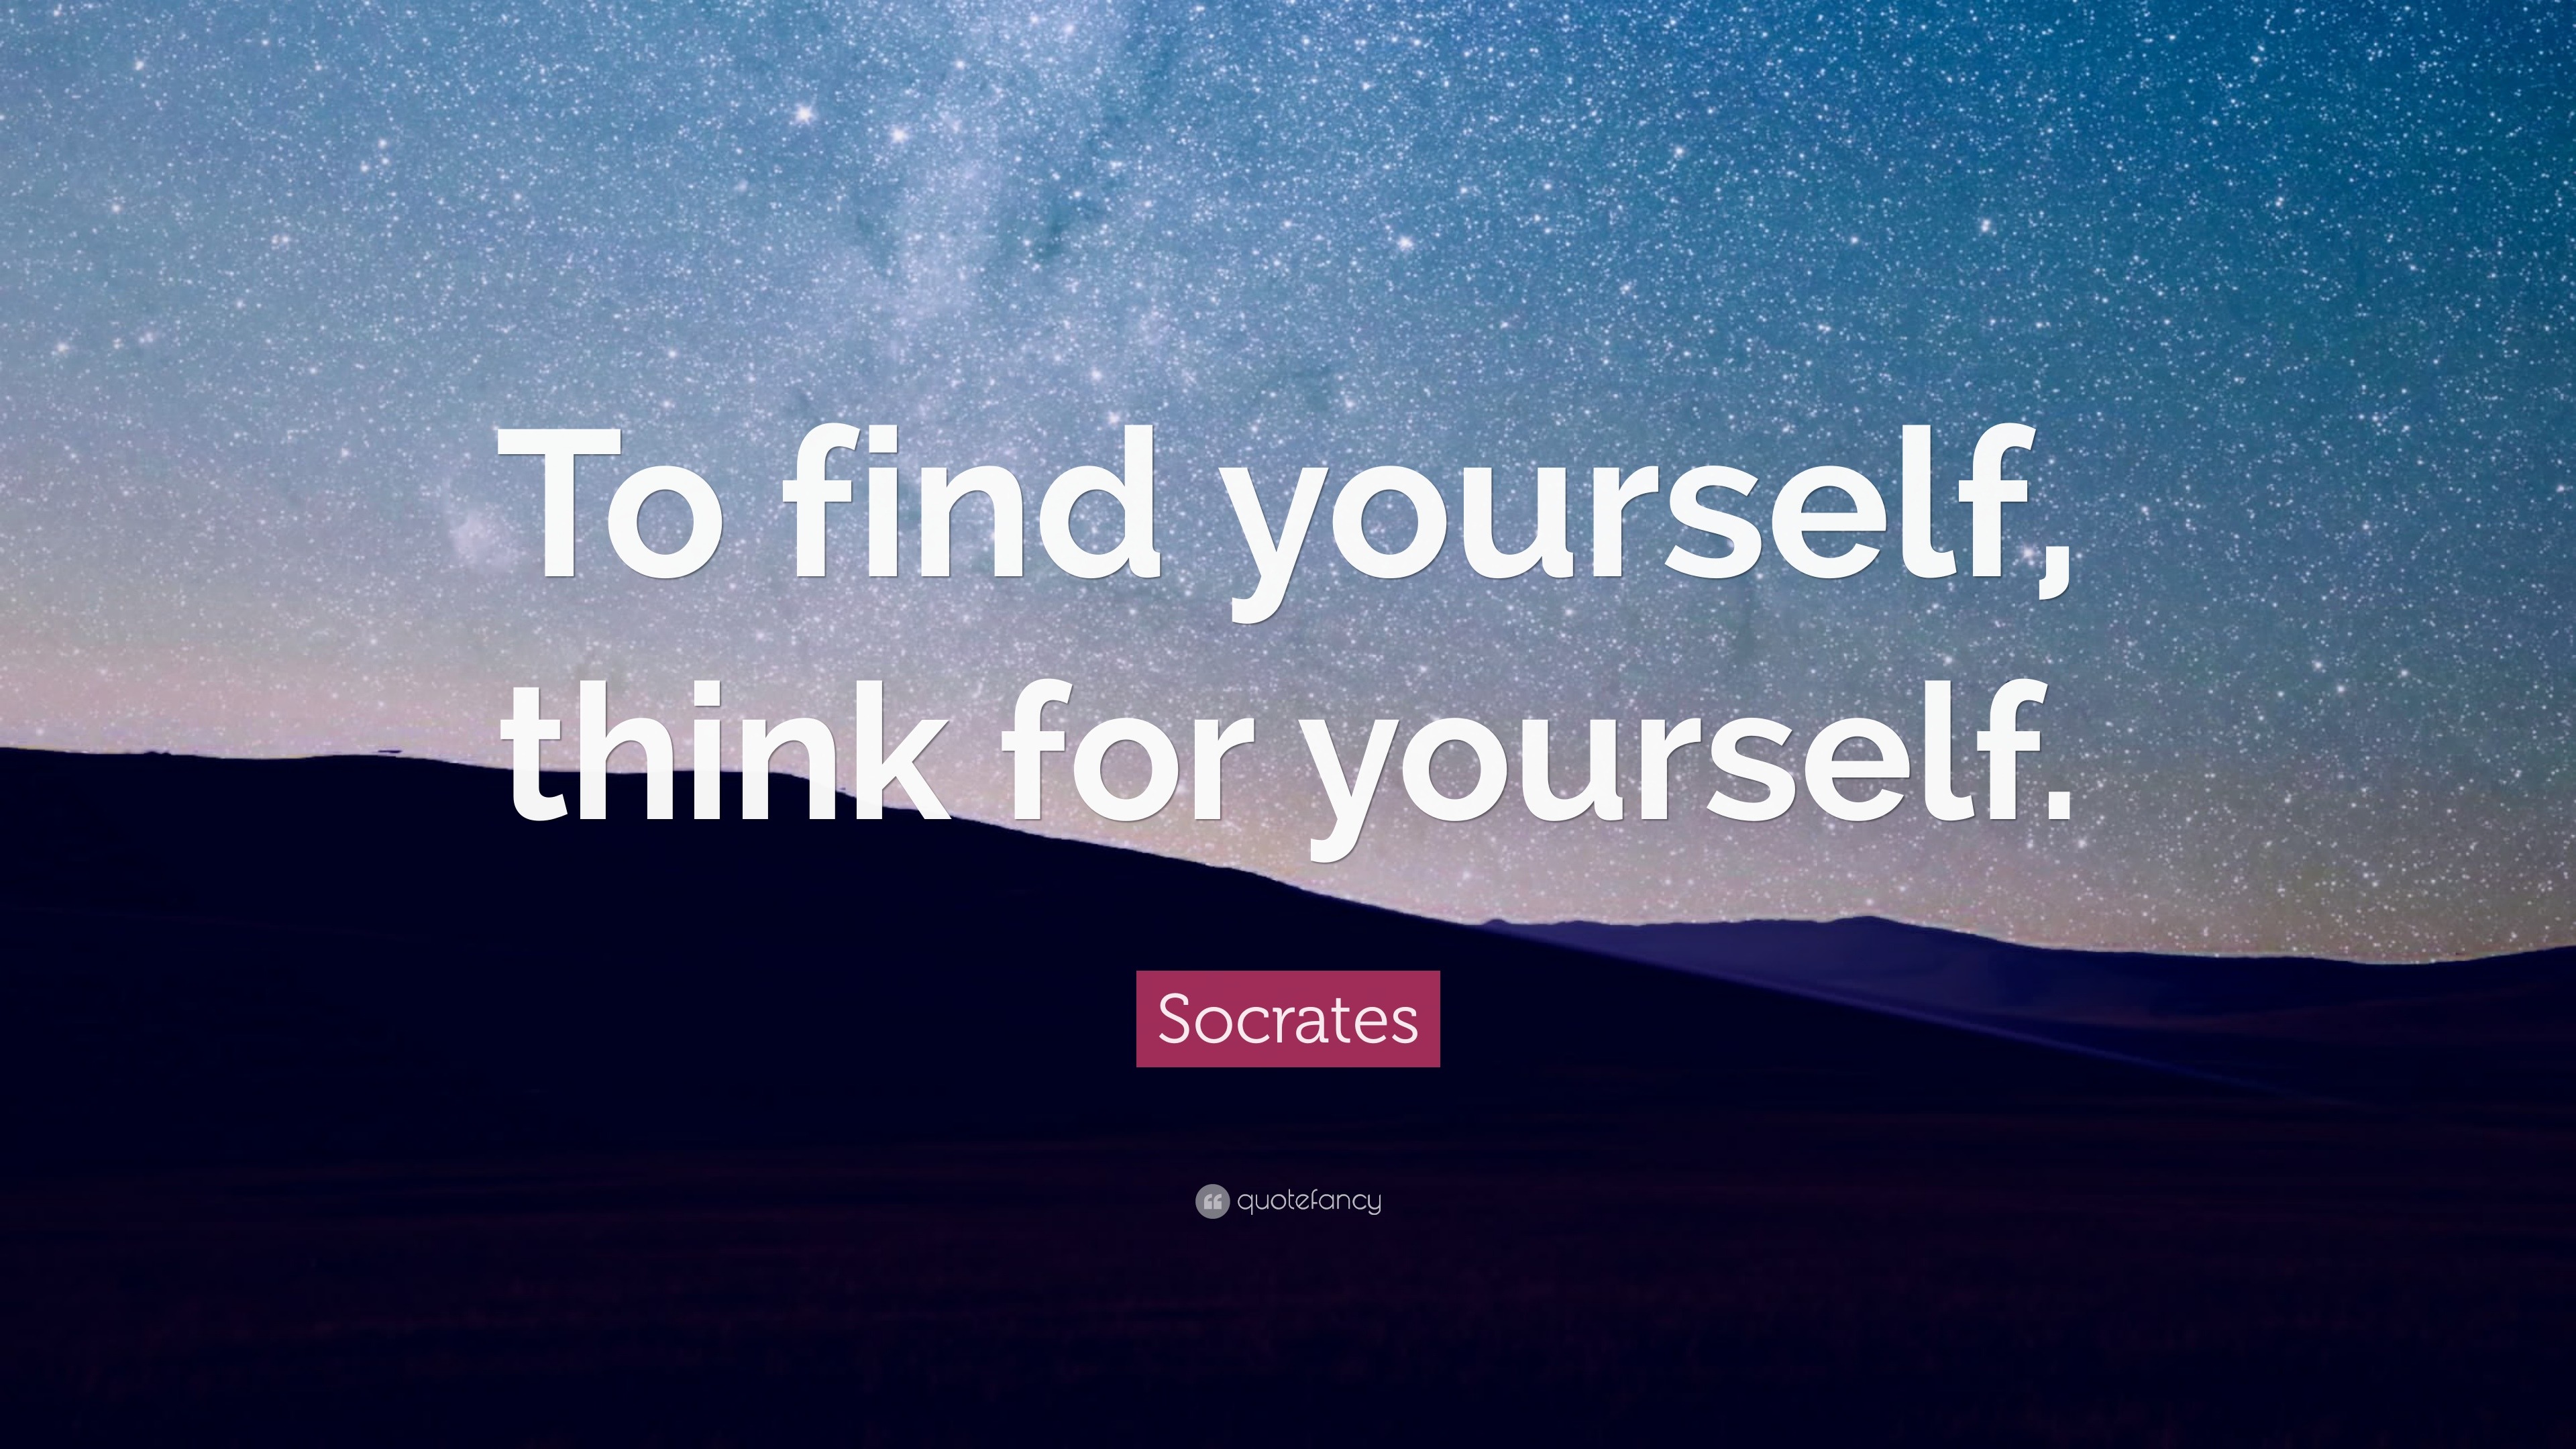 Socrates Quote: “To find yourself, think for yourself.” (20 wallpapers